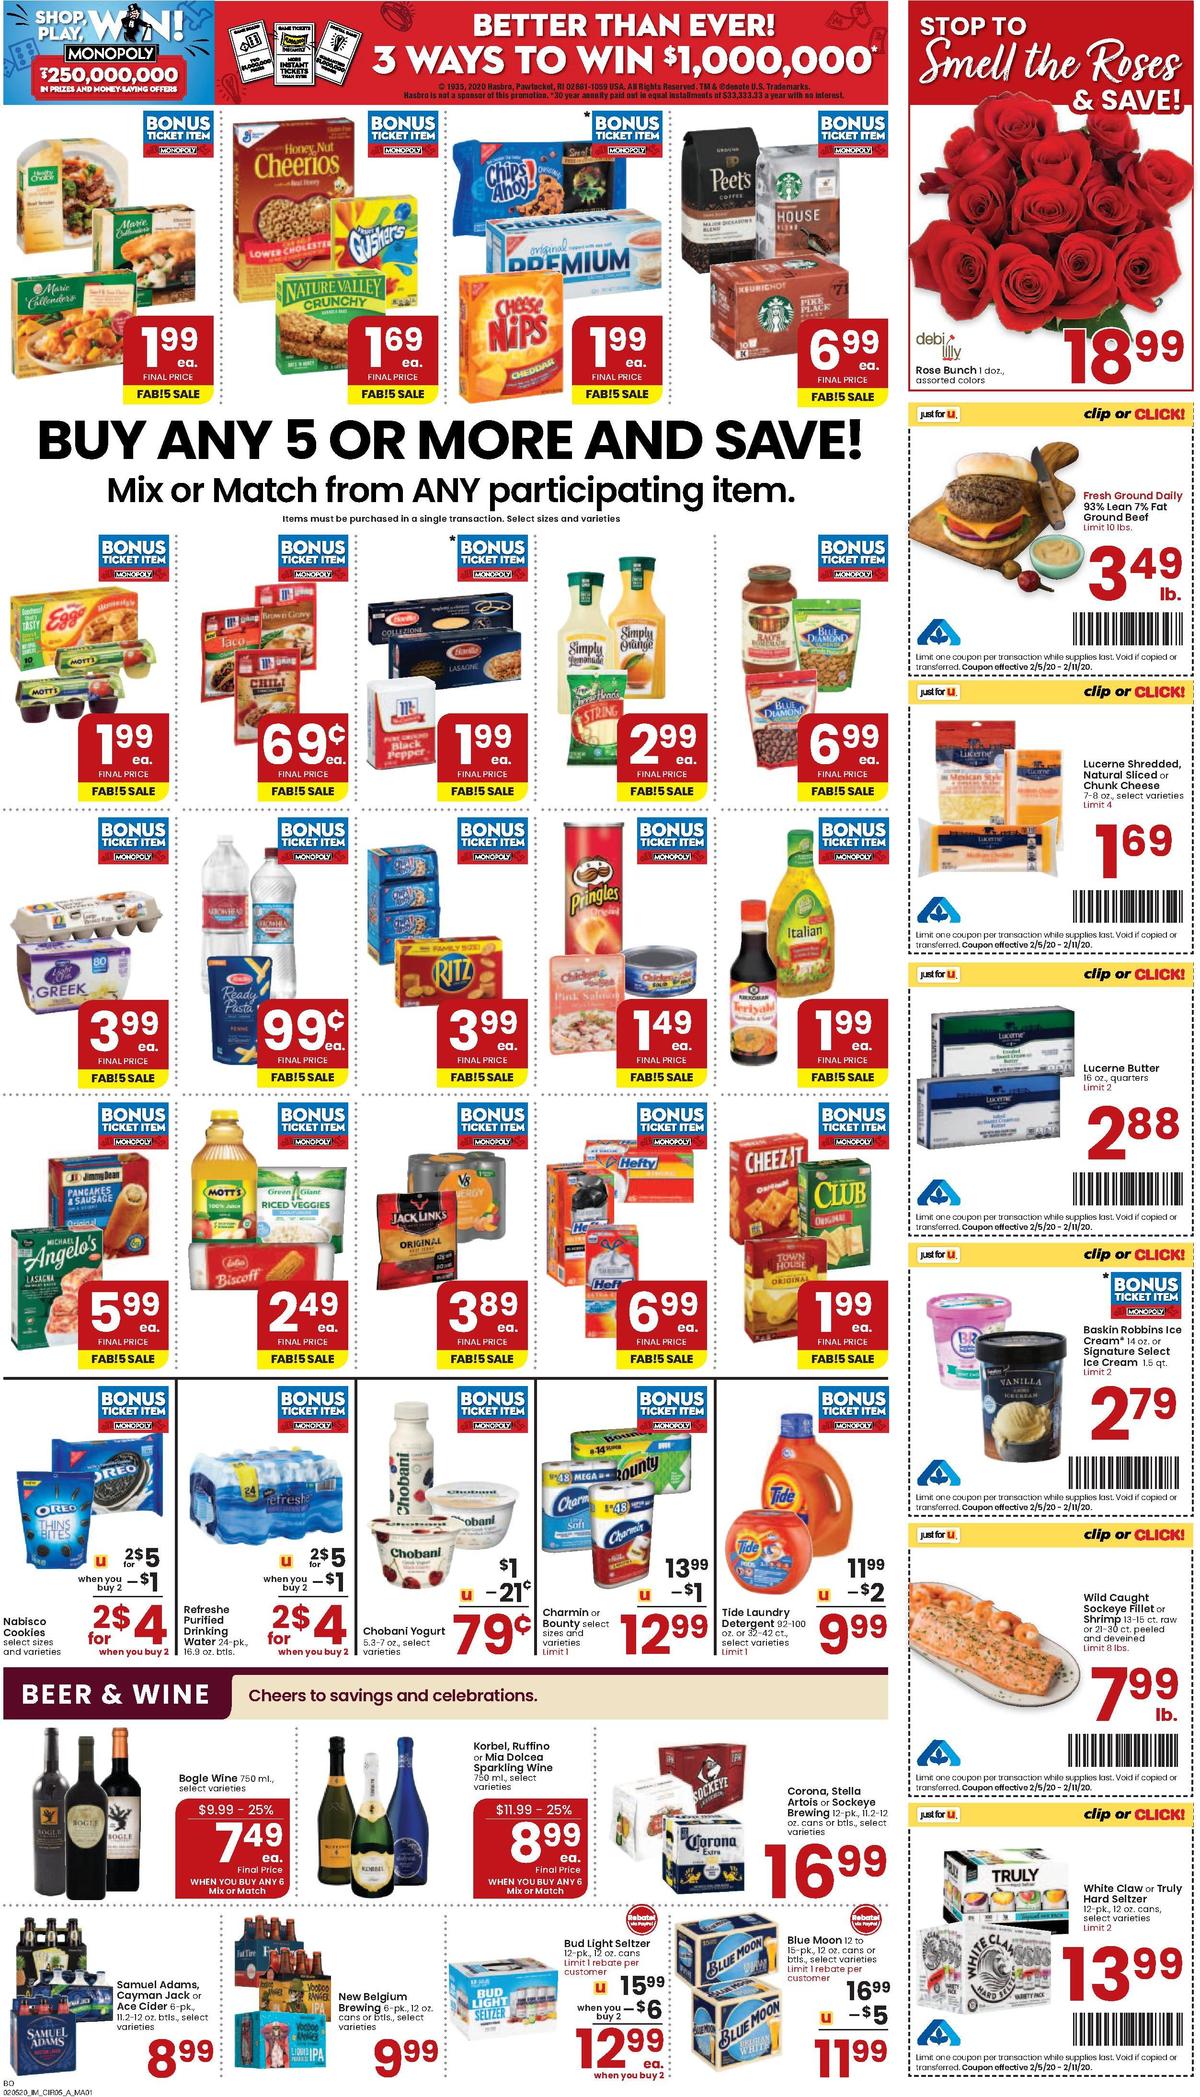 Albertsons Weekly Ad from February 5